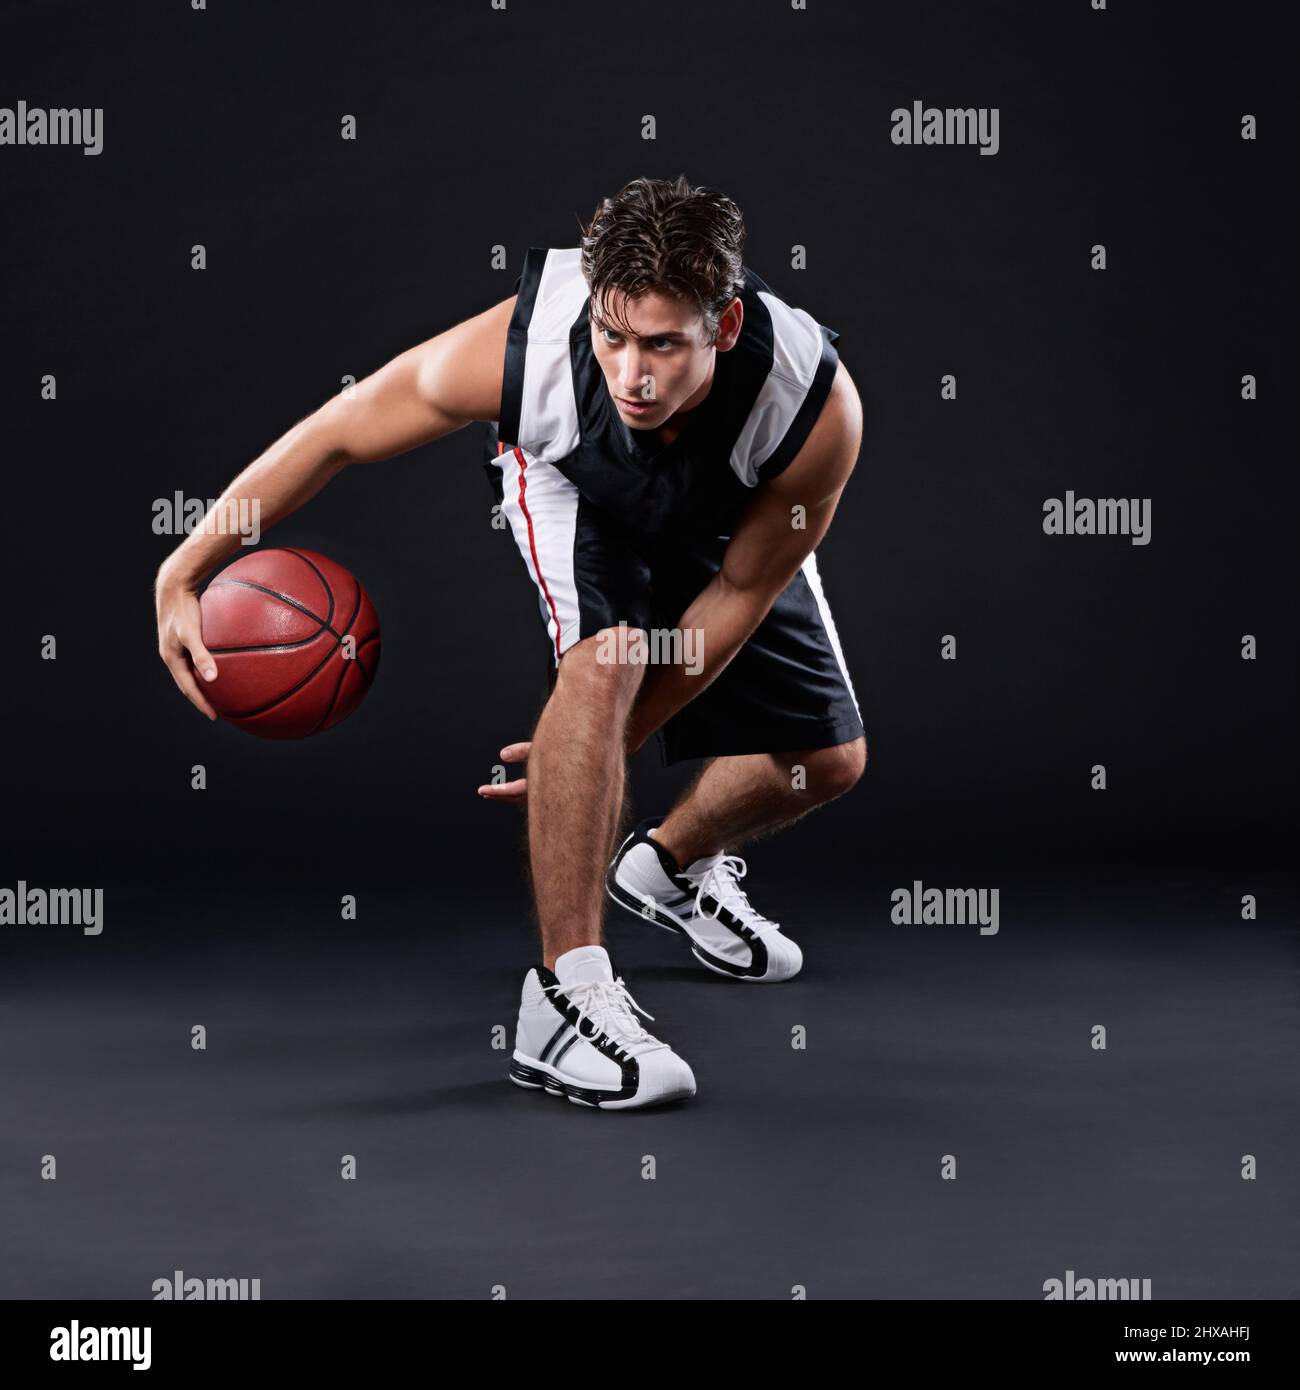 Play with heart. Full length shot of a male basketball player in action against a black background. Stock Photo